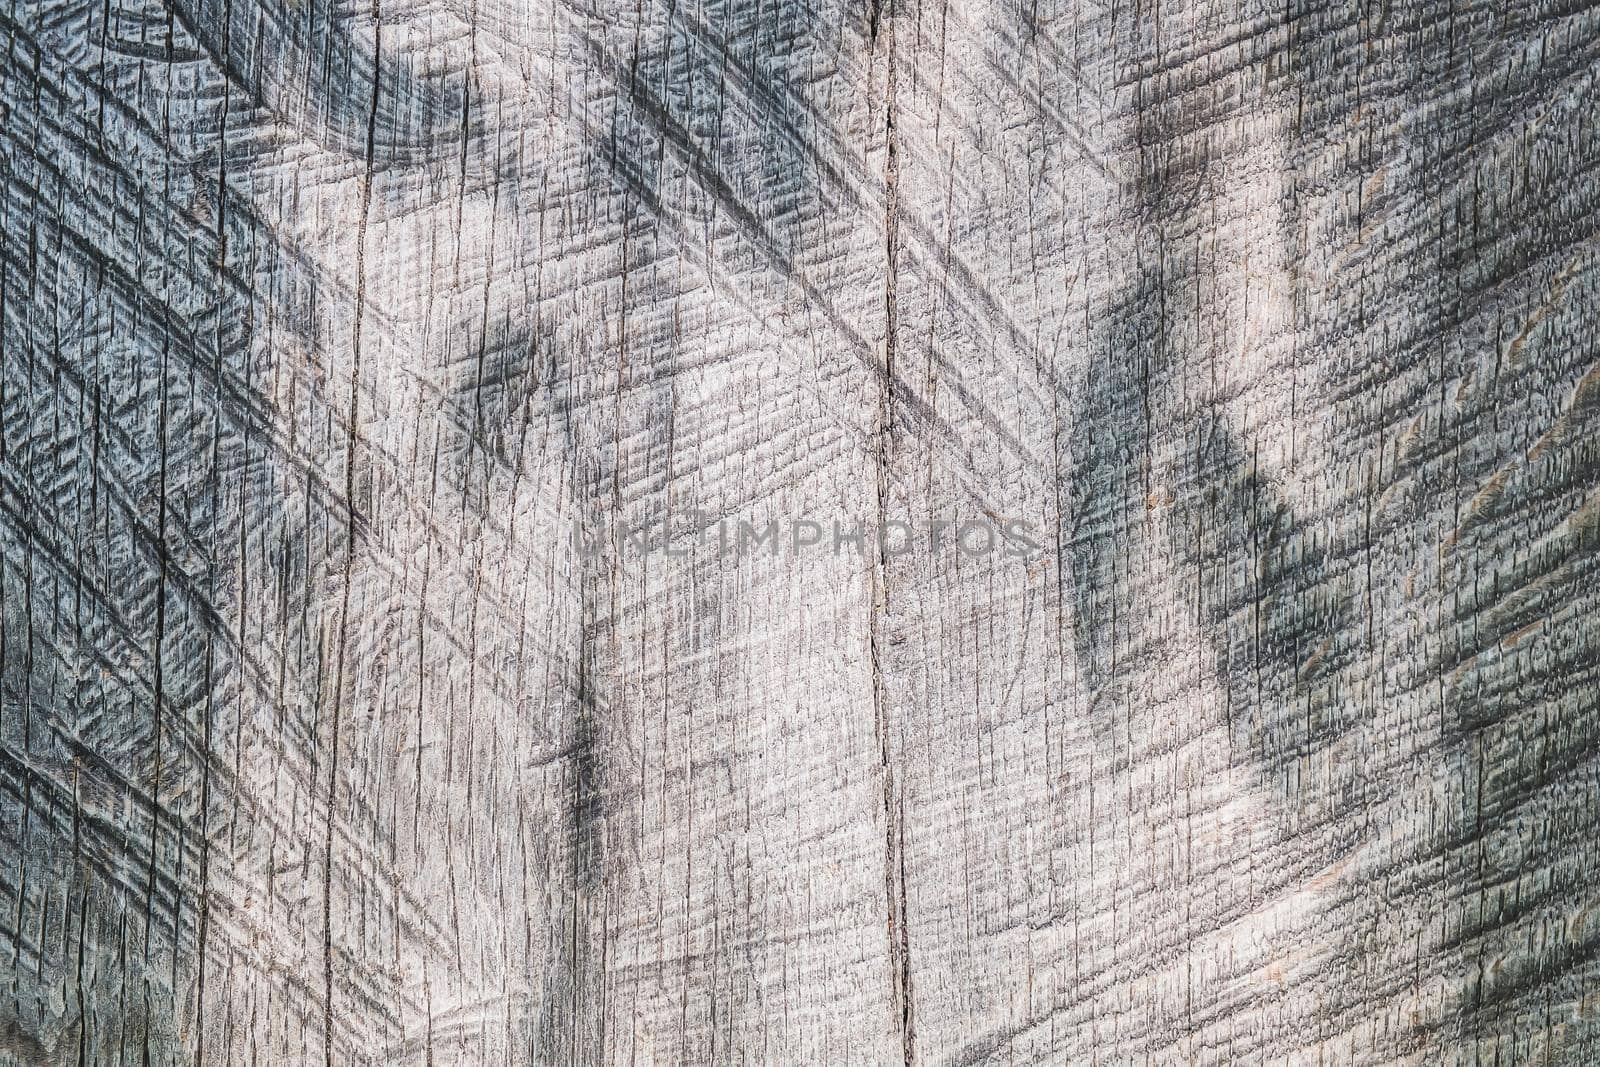 Rustic old wood plank texture for background and design concepts. the shadow of the foliage on the wooden board. gray. Horizontal. background